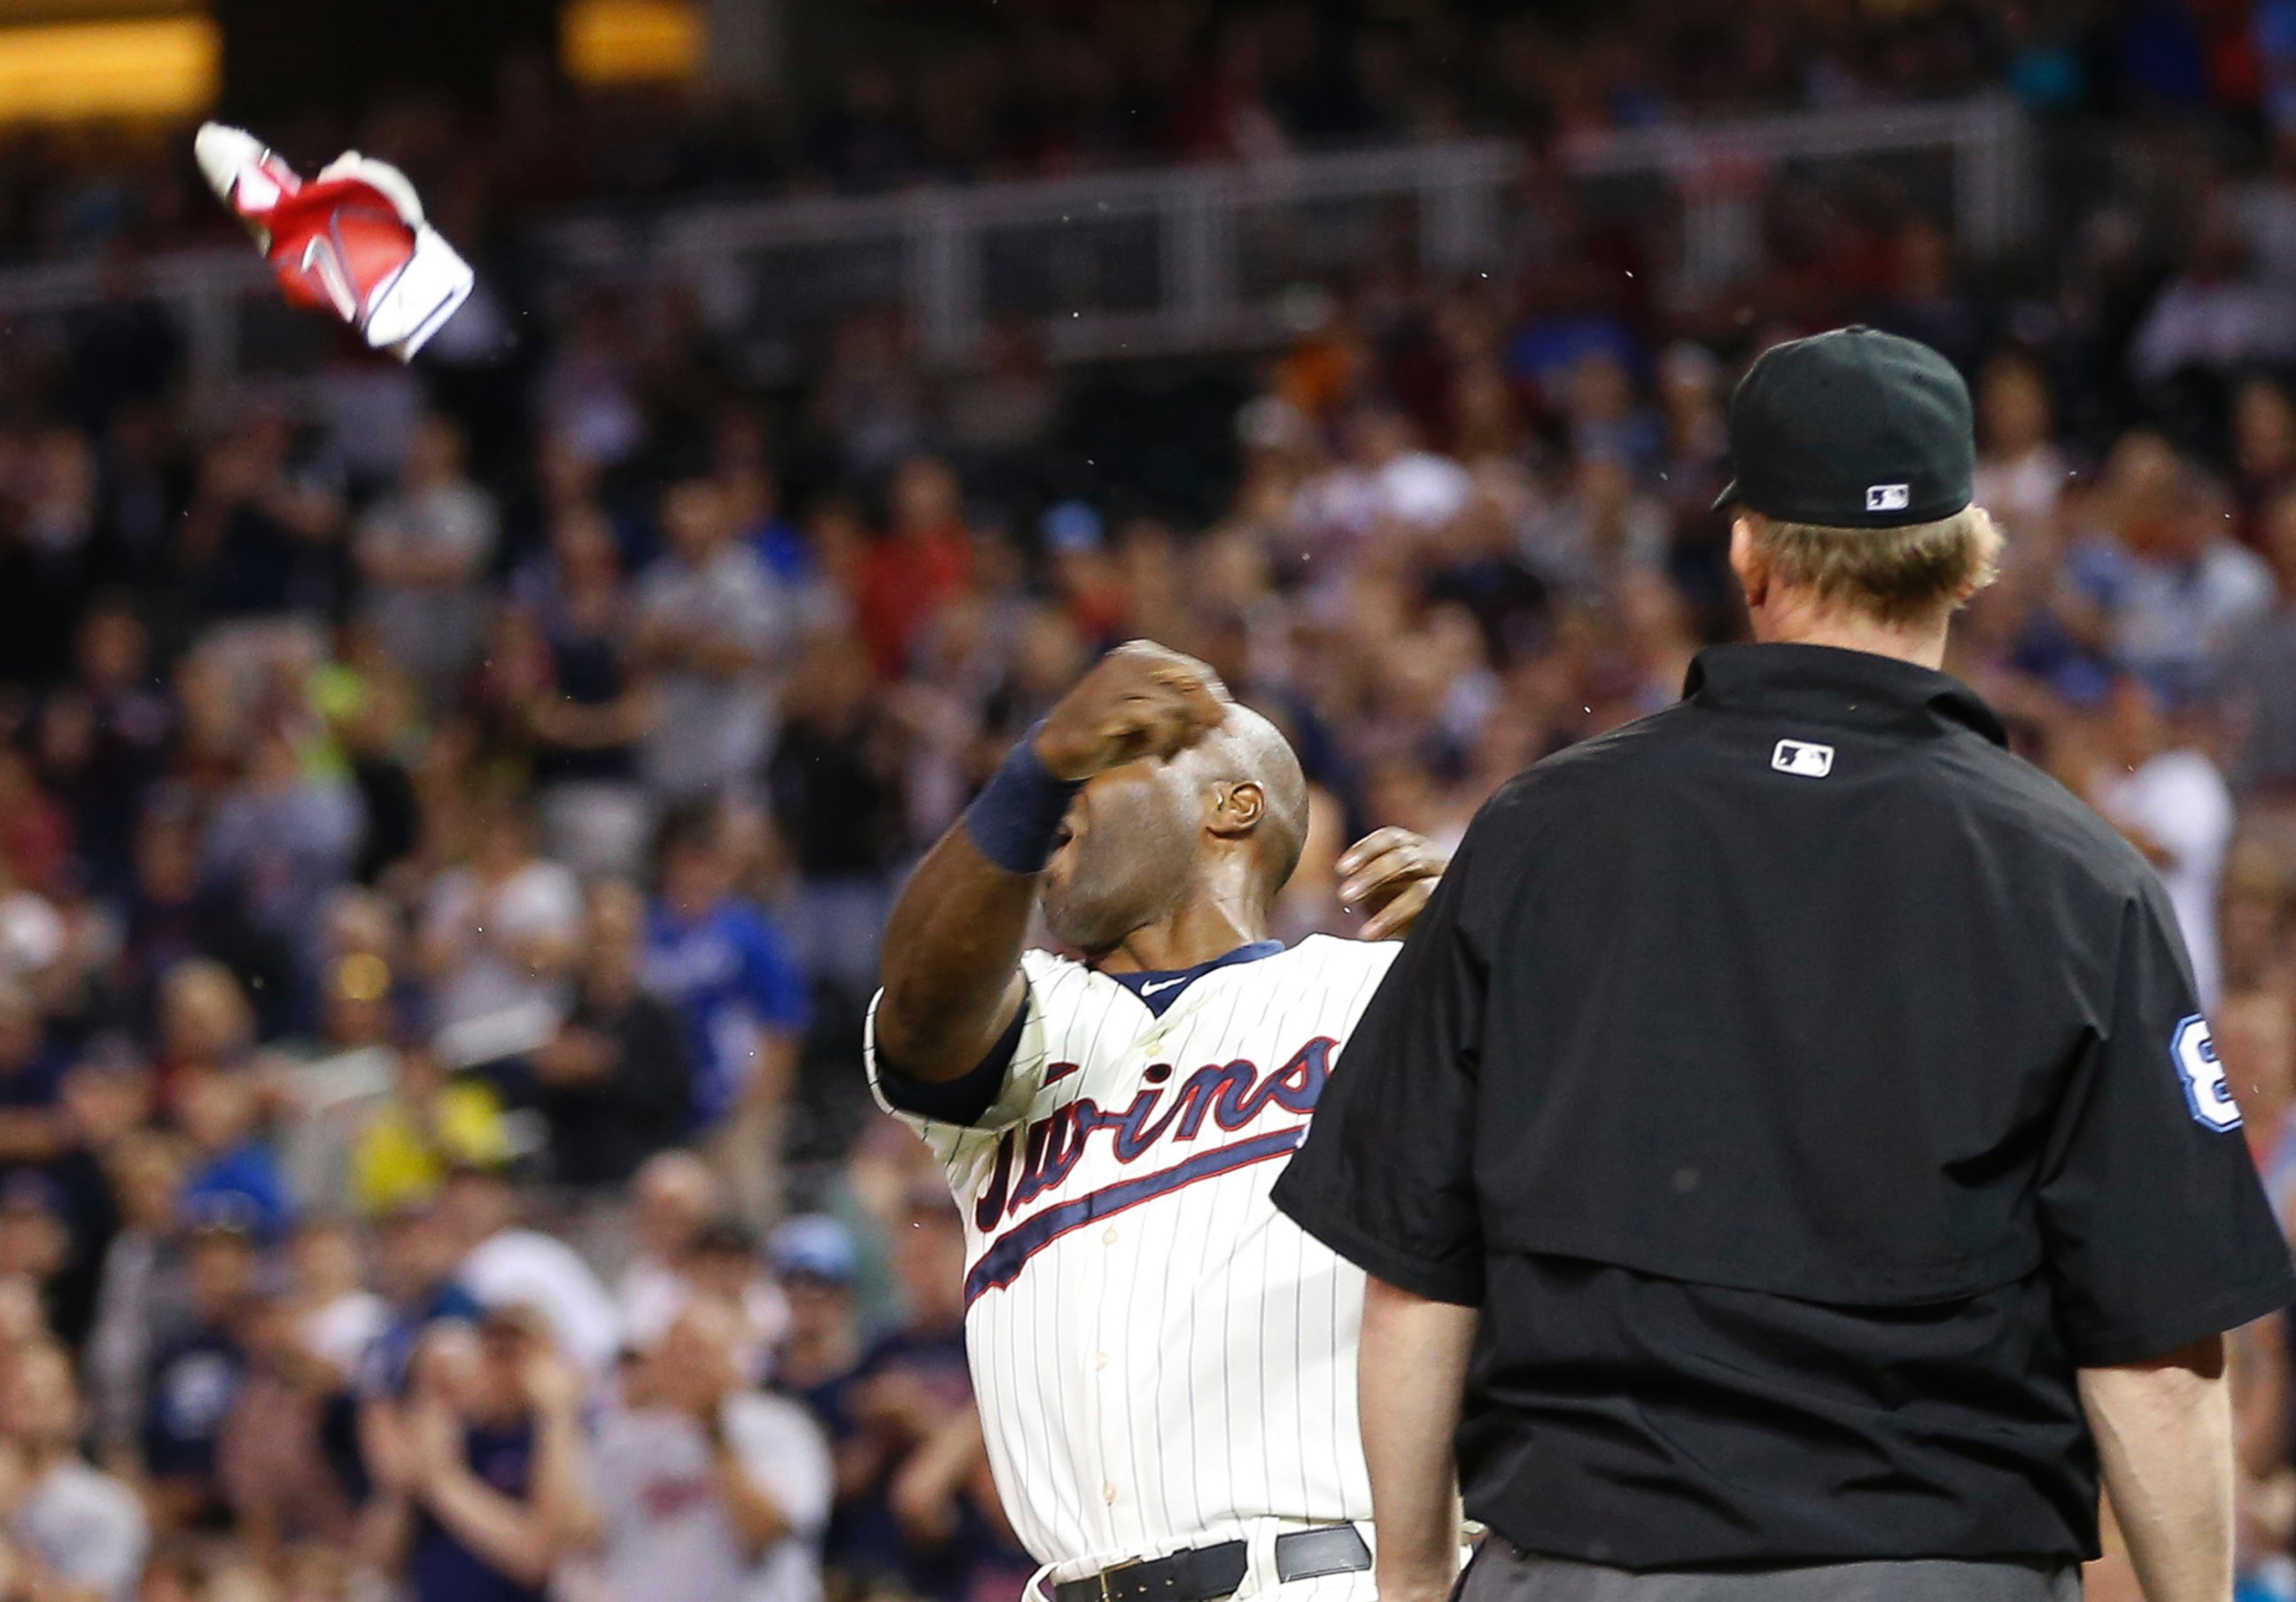 PHOTO: Minnesota Twins player Torii Hunter tosses his batting glove after he was ejected during the eighth inning of a baseball game against the Kansas City Royals, Wednesday, June 10, 2015, in Minneapolis.